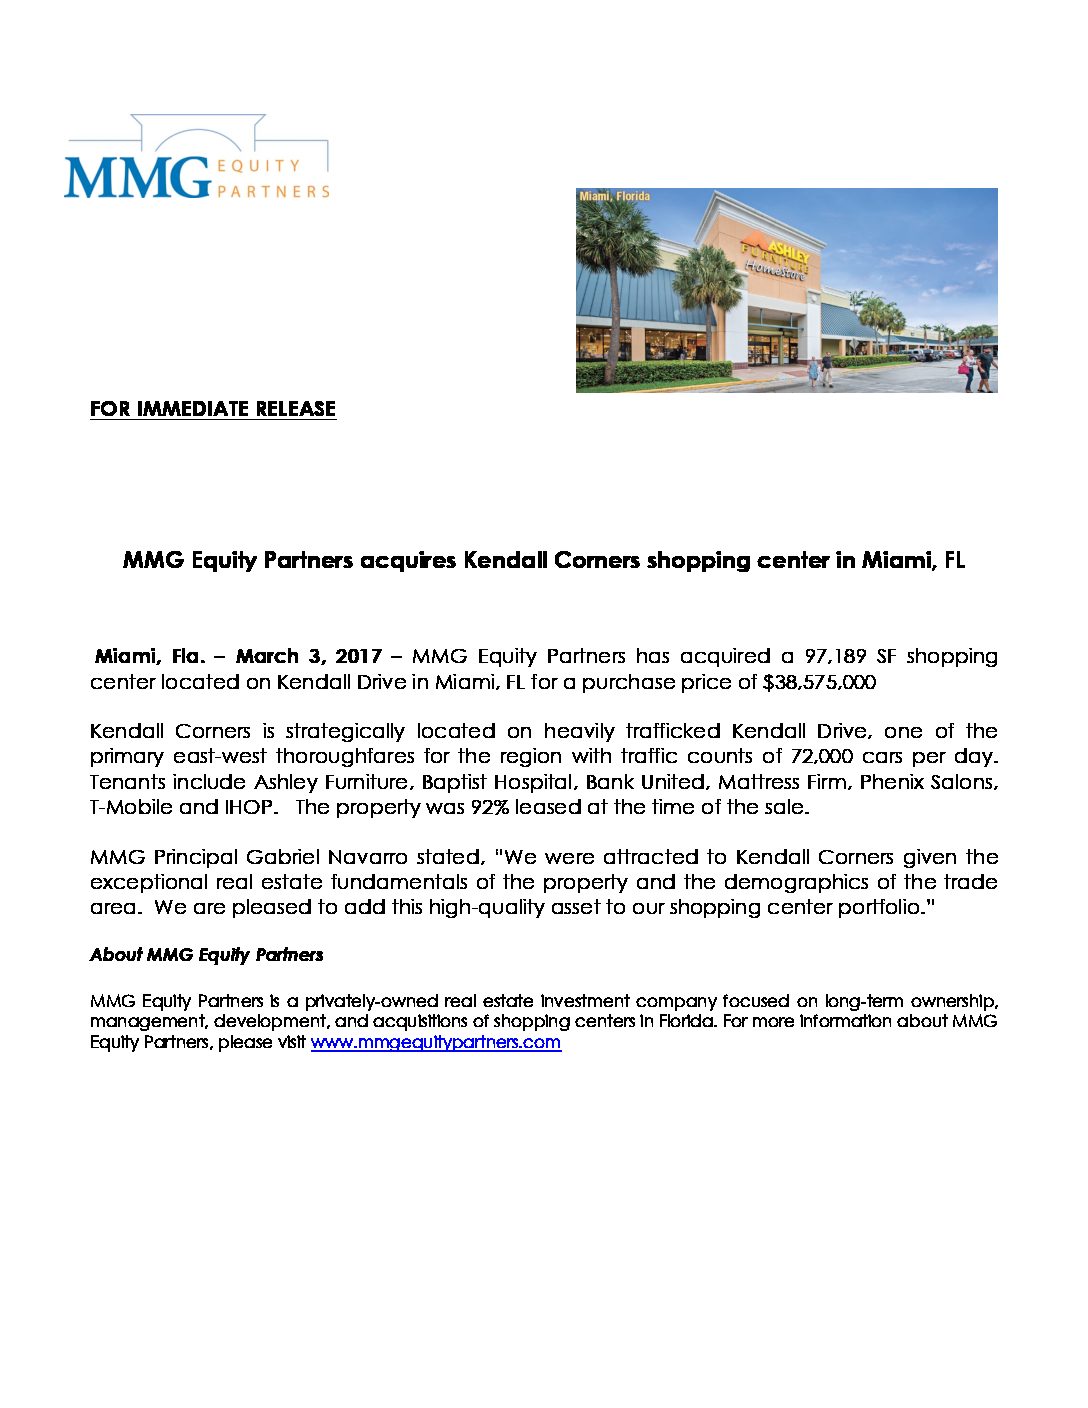 Press-Release-MMG-Acquires-Kendall-Corners-2